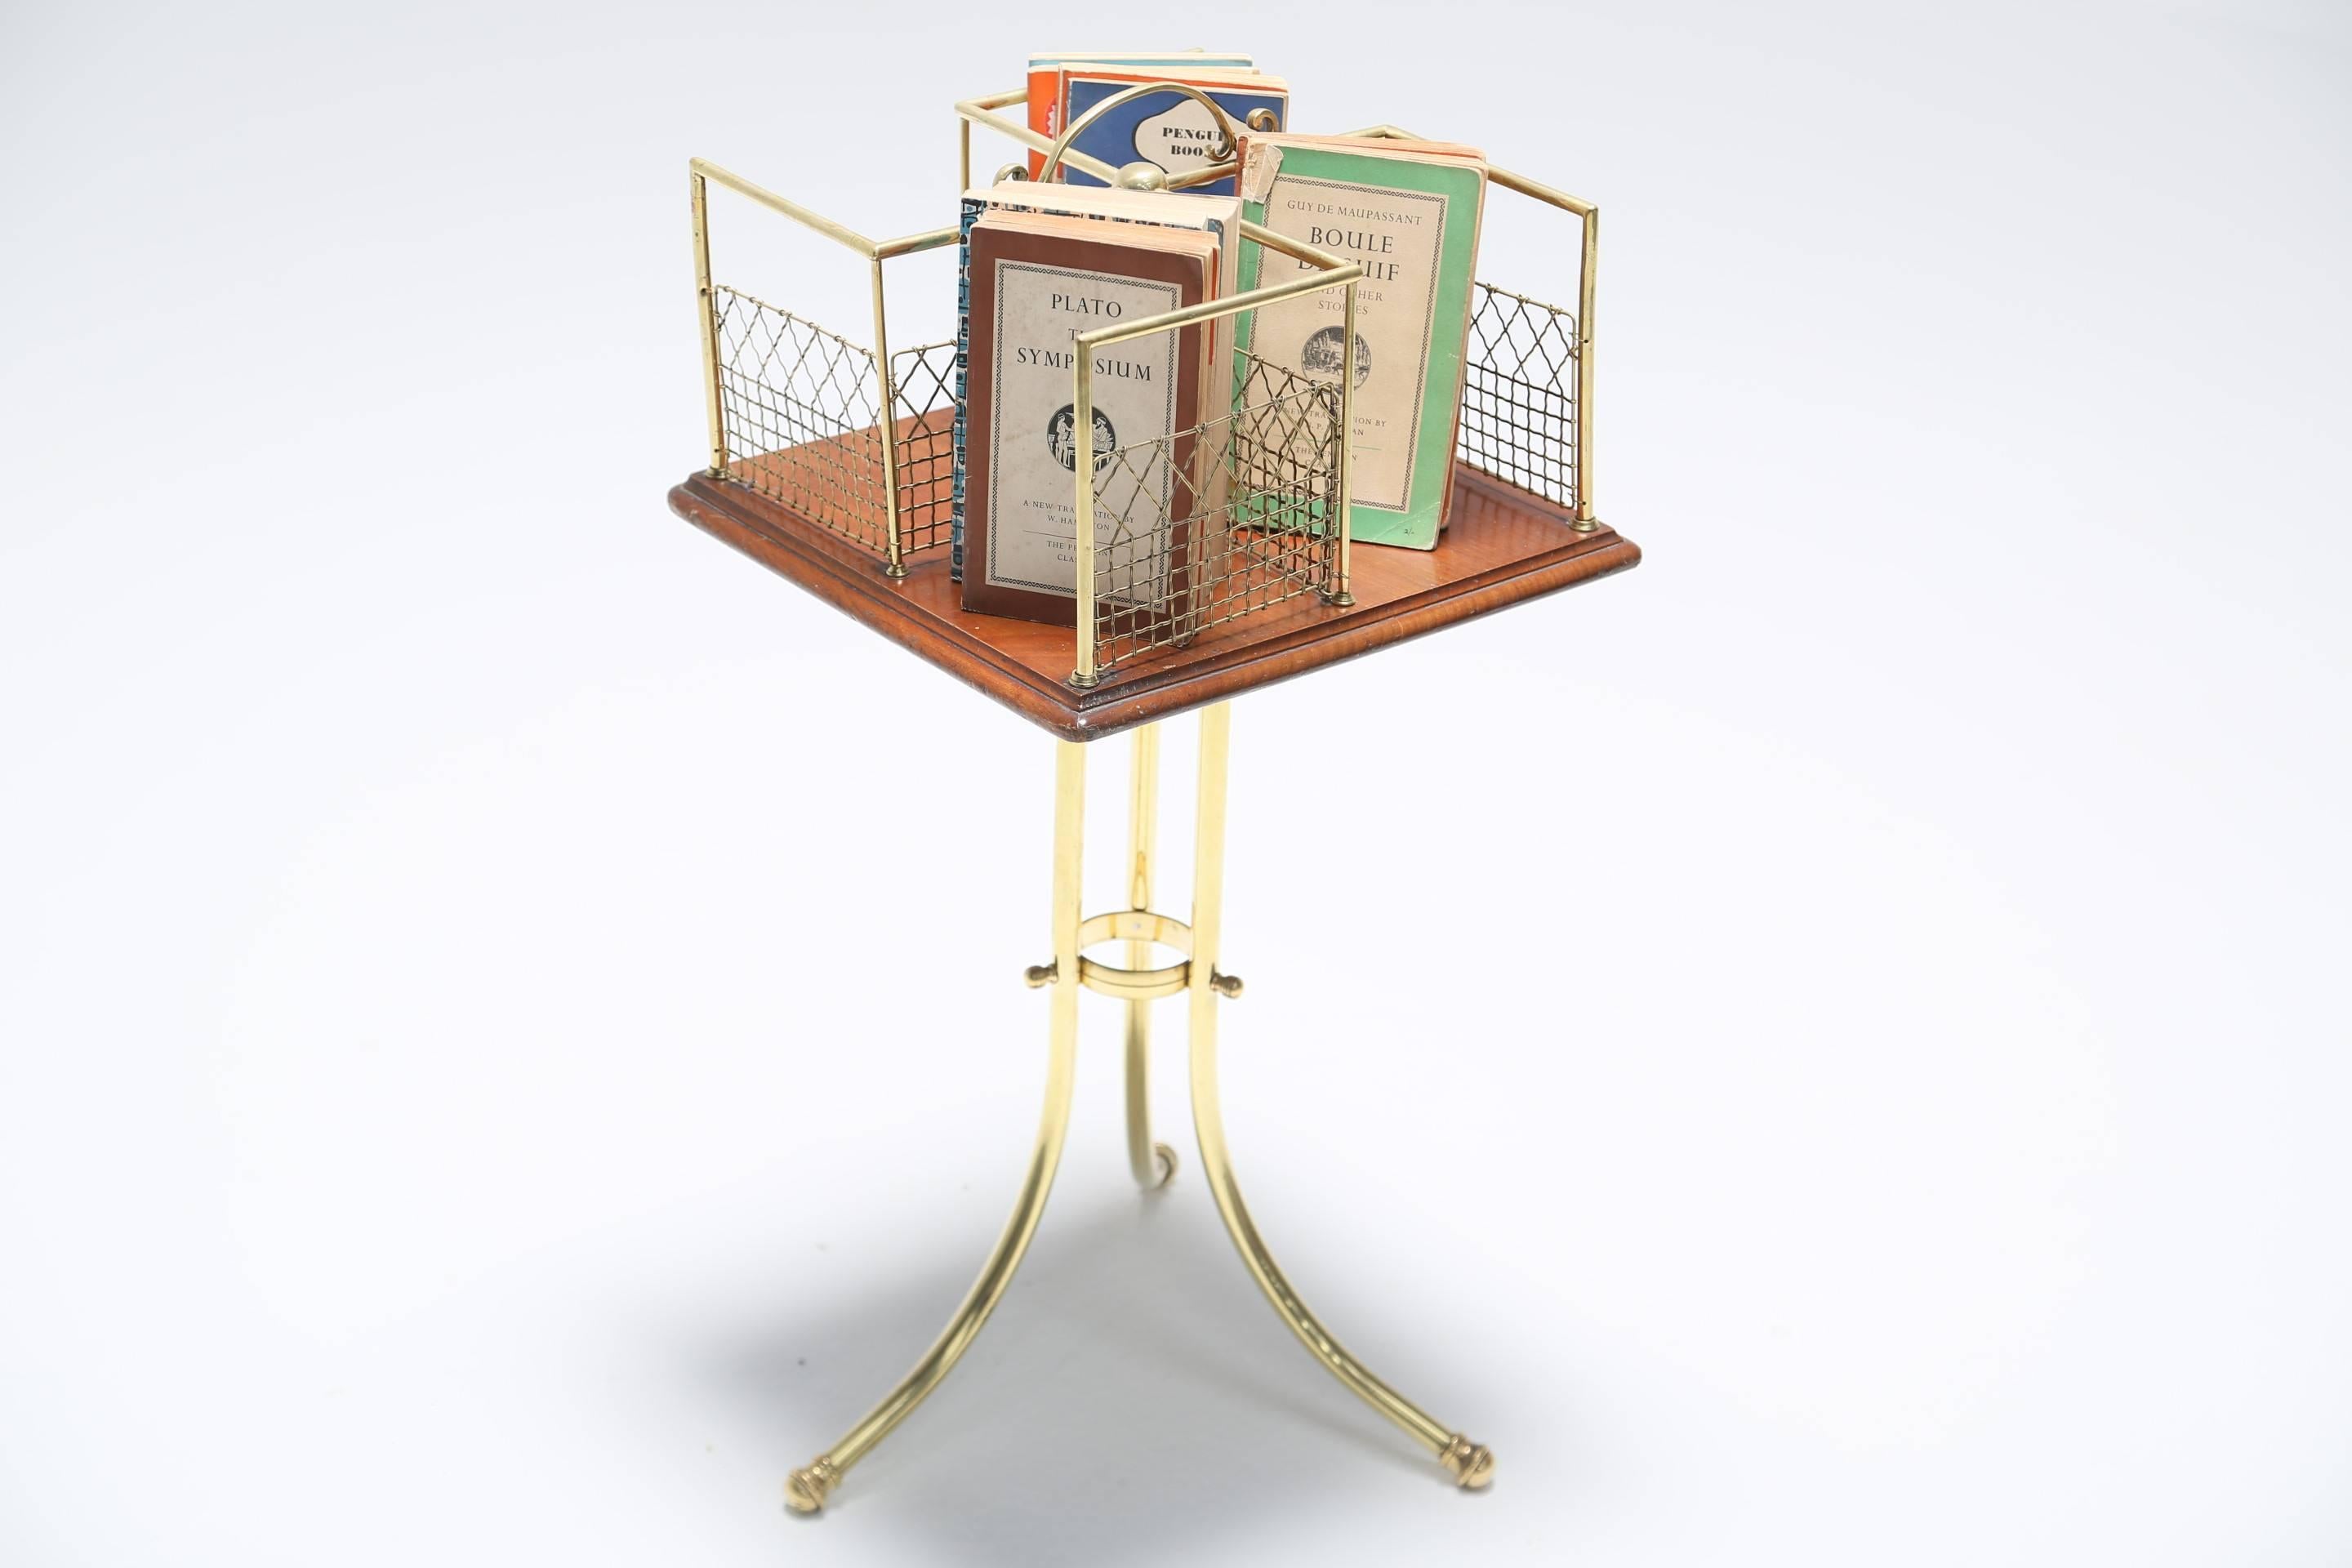 A brass and mahogany Edwardian revolving book stand or book table. A beautifully decorative piece in lovely original condition, possibly French from the Edwardian period.

